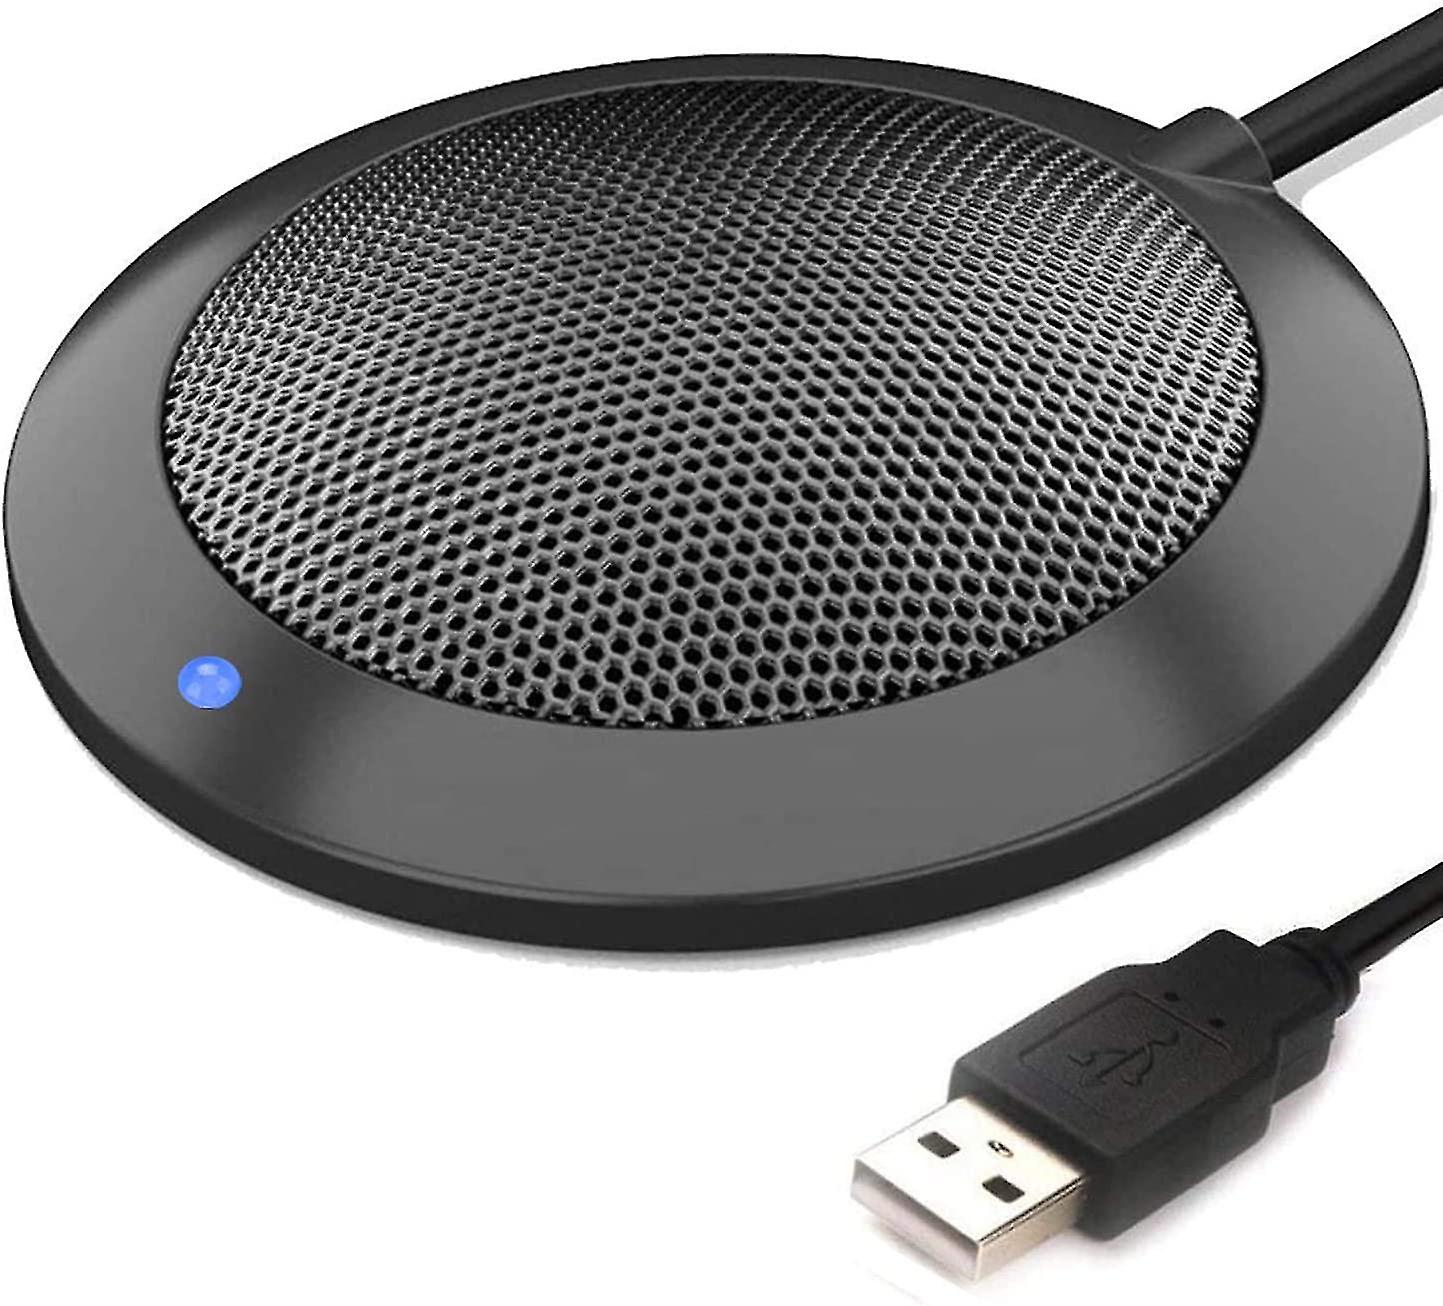 How To Connect USB Microphone To Skype